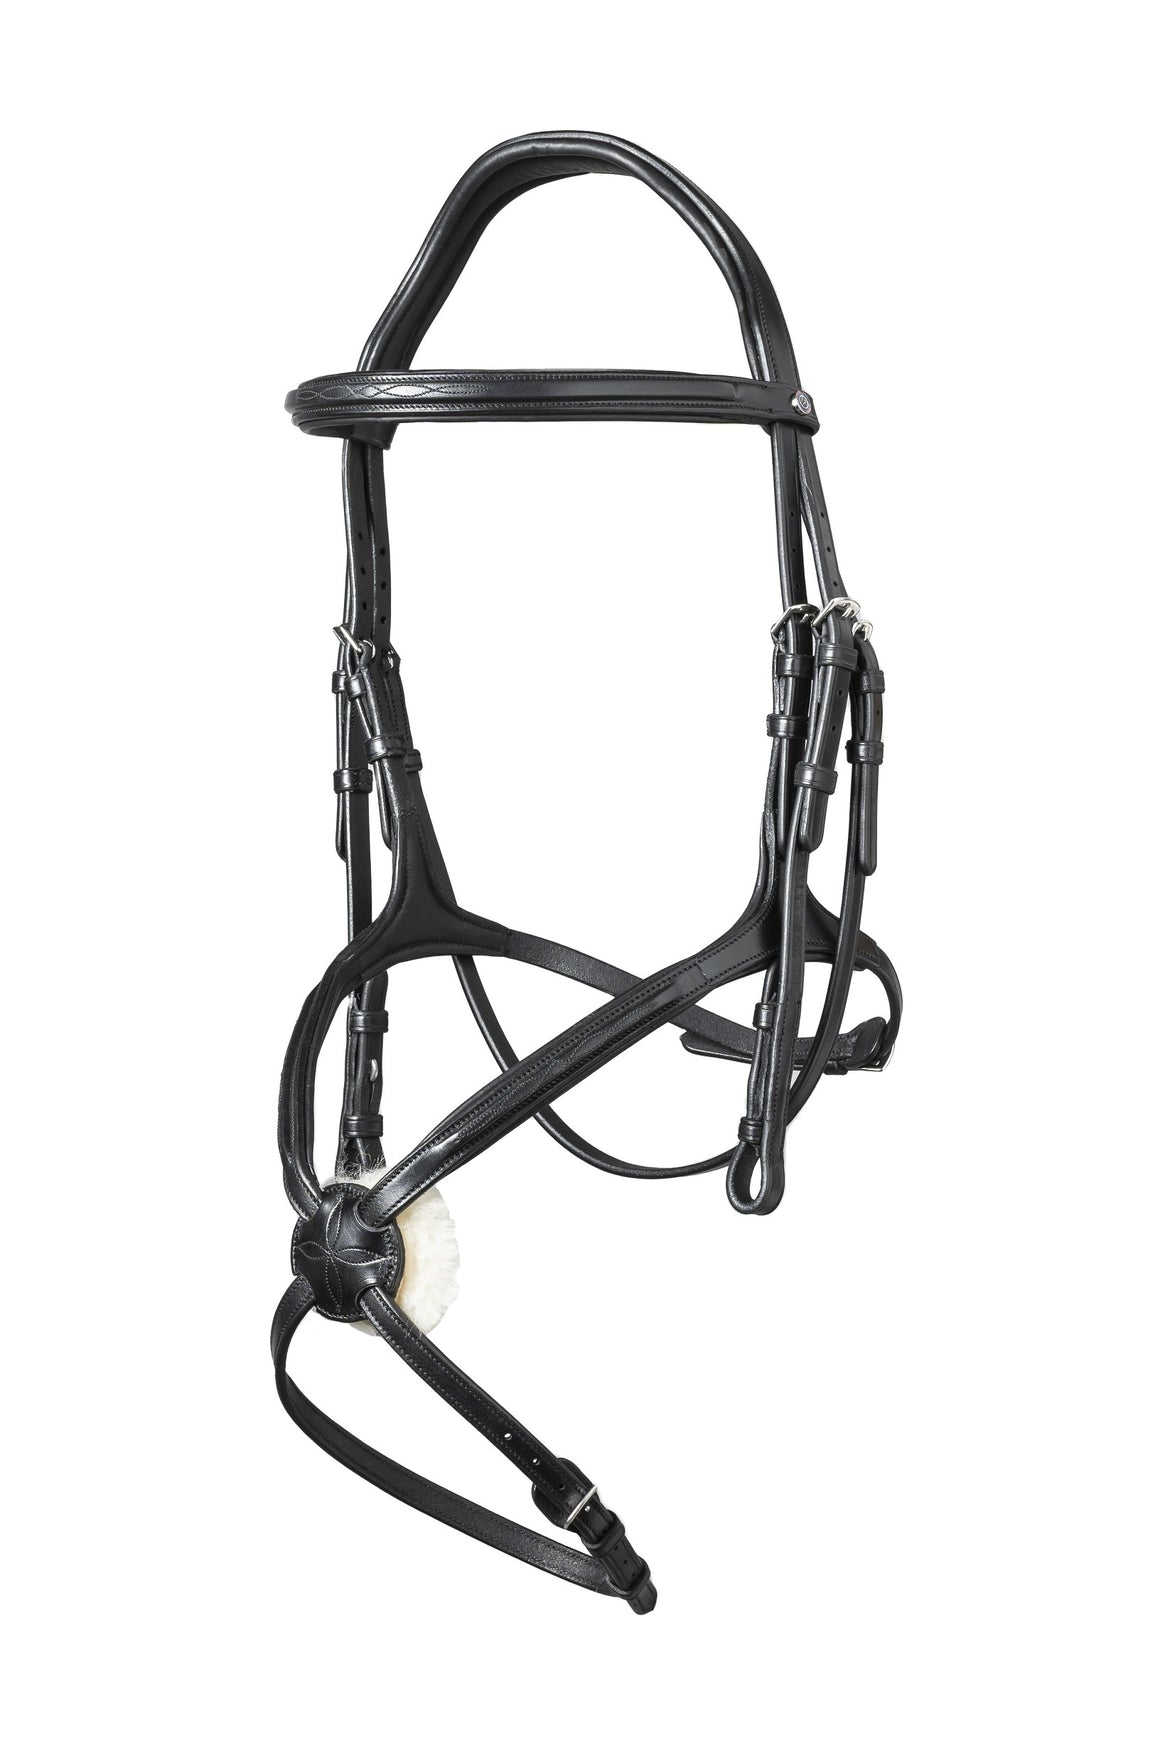 Trust Oslo Mexican Grackle Bridle